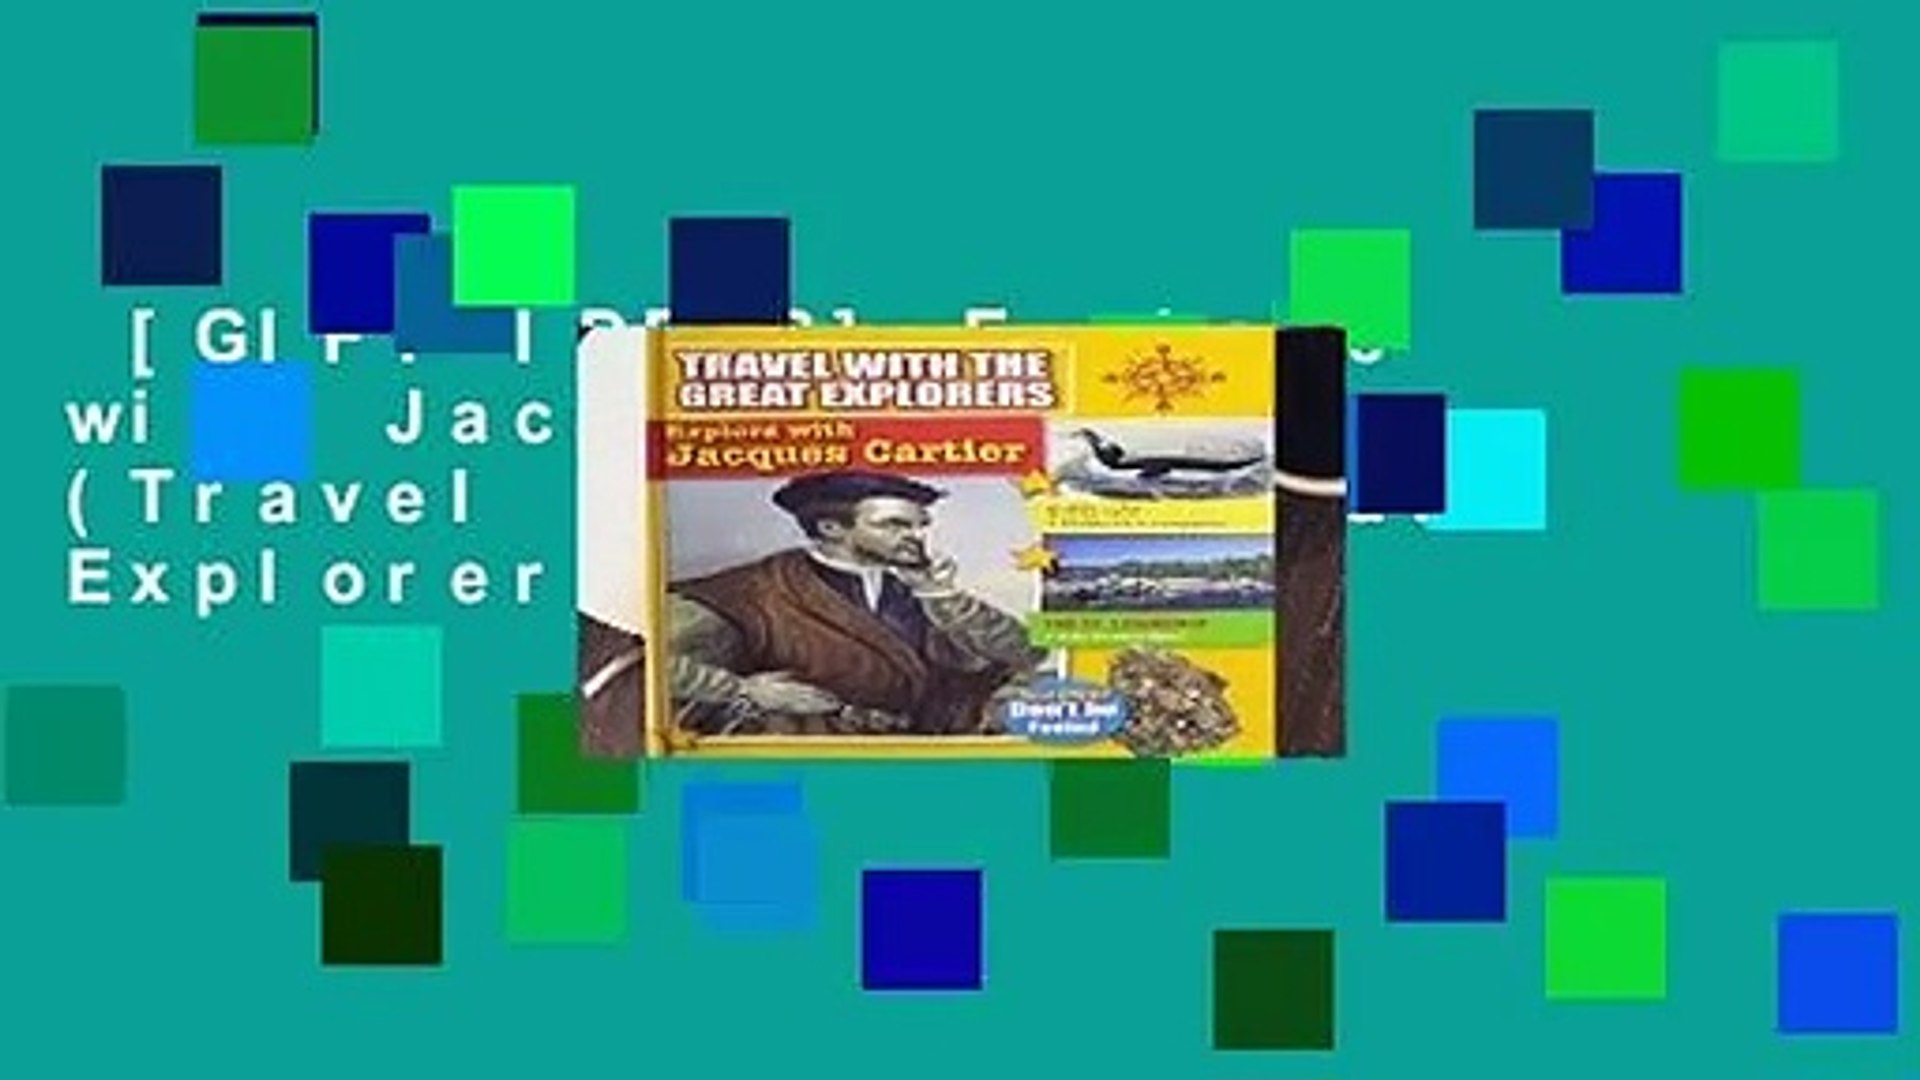 ⁣[GIFT IDEAS] Explore with Jacques Cartier (Travel with the Great Explorers)